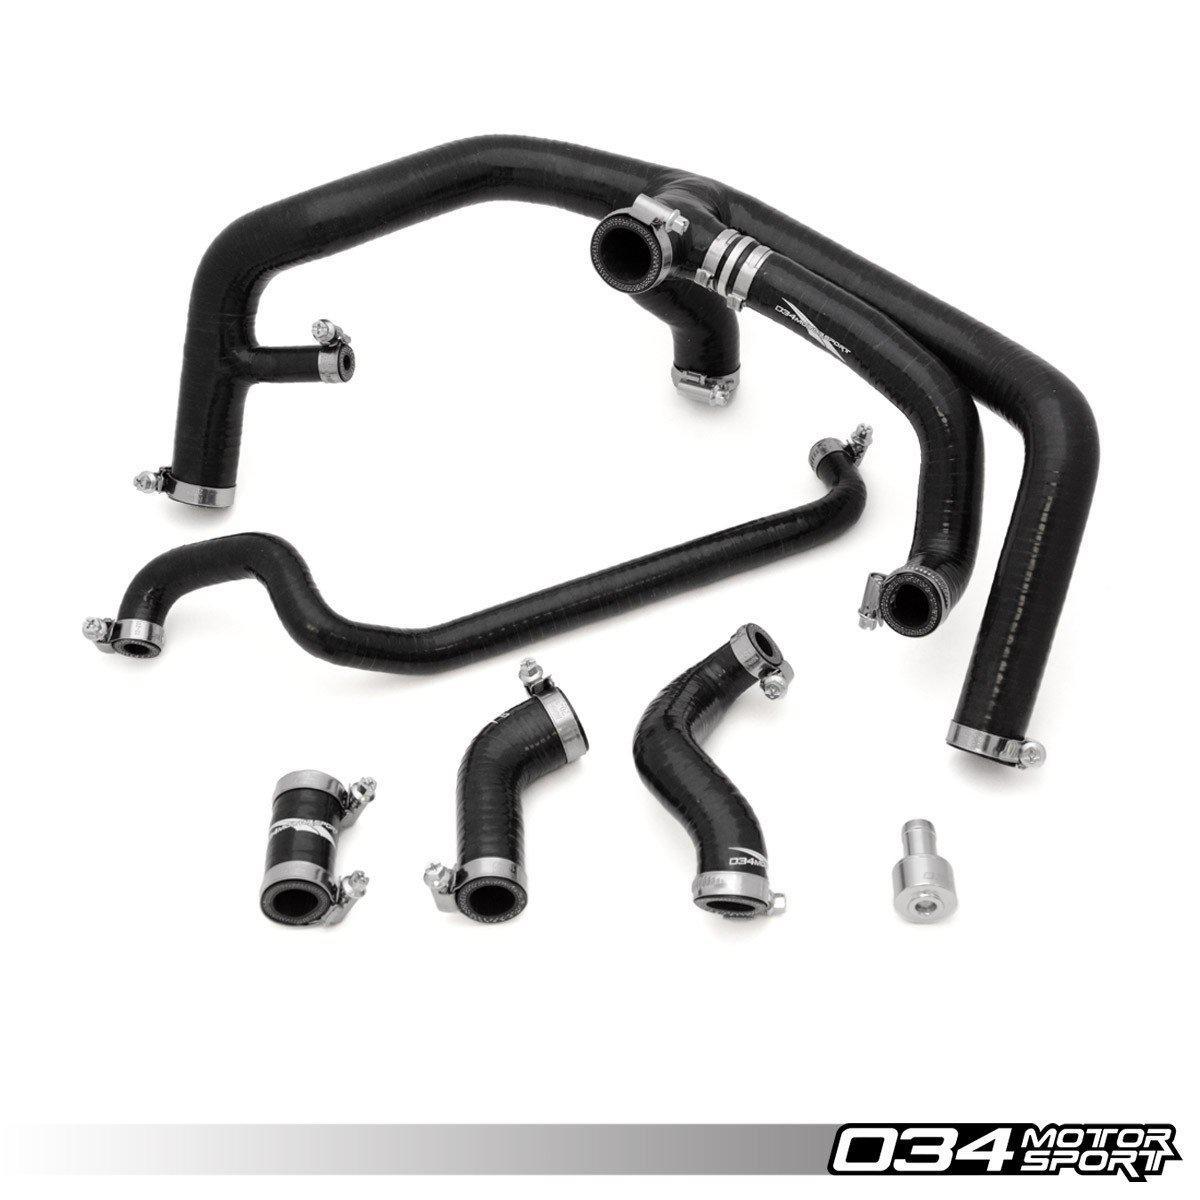 Silicone Breather Hose Kit, B5 Audi S4 & C5 Audi A6 2.7T, Spider Hose Replacement-A Little Tuning Co